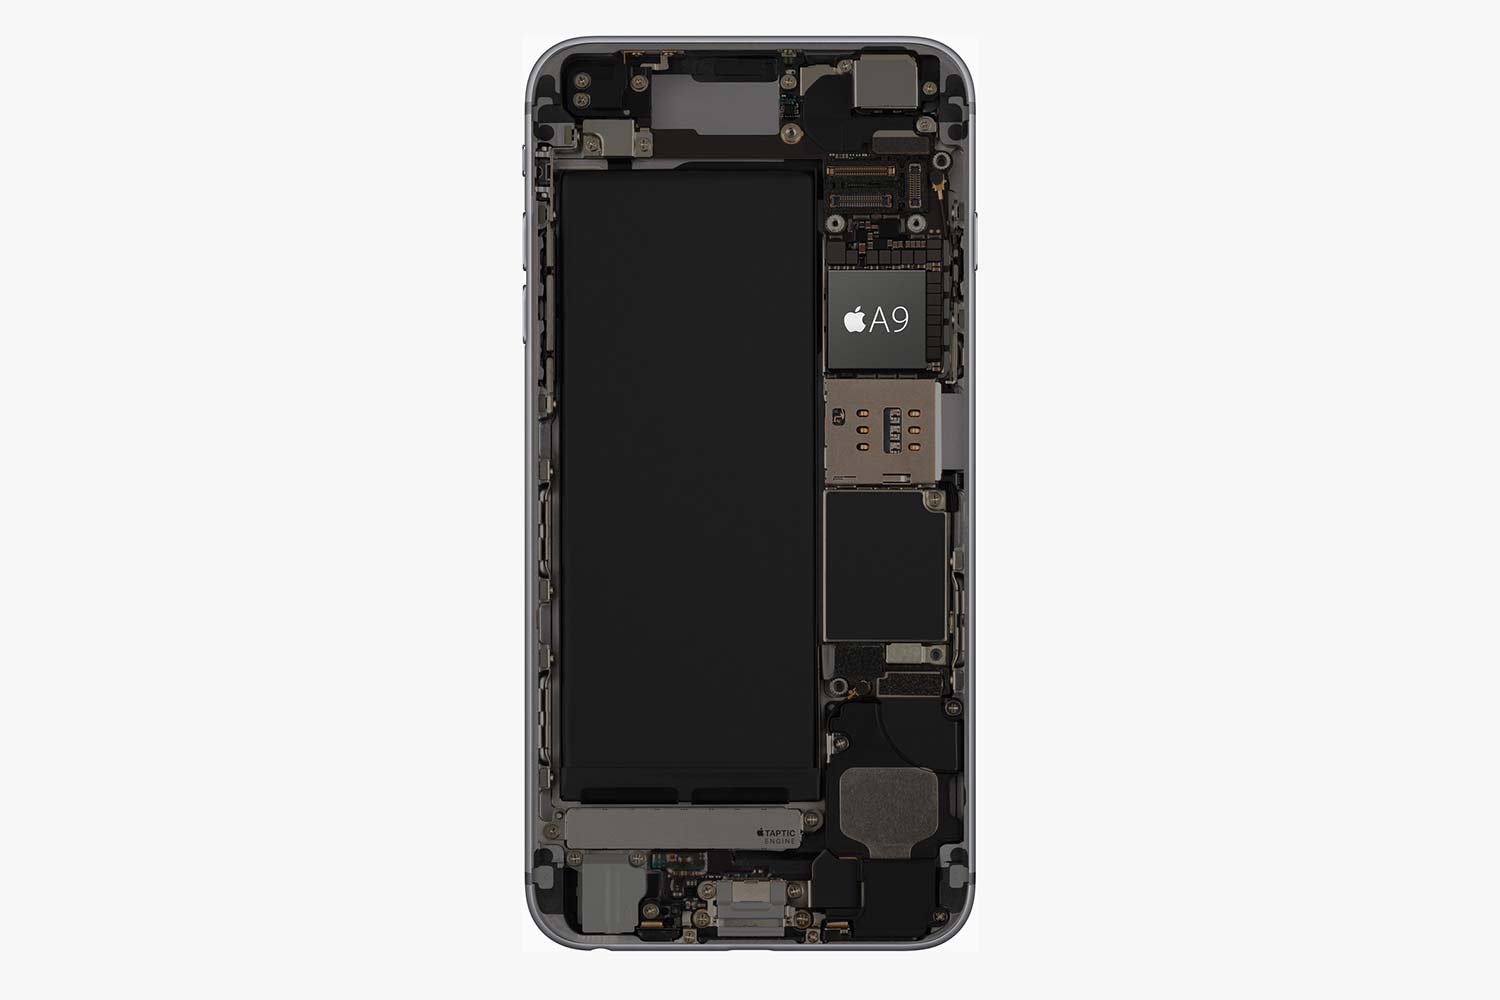 iphone 6s news a9 inside large